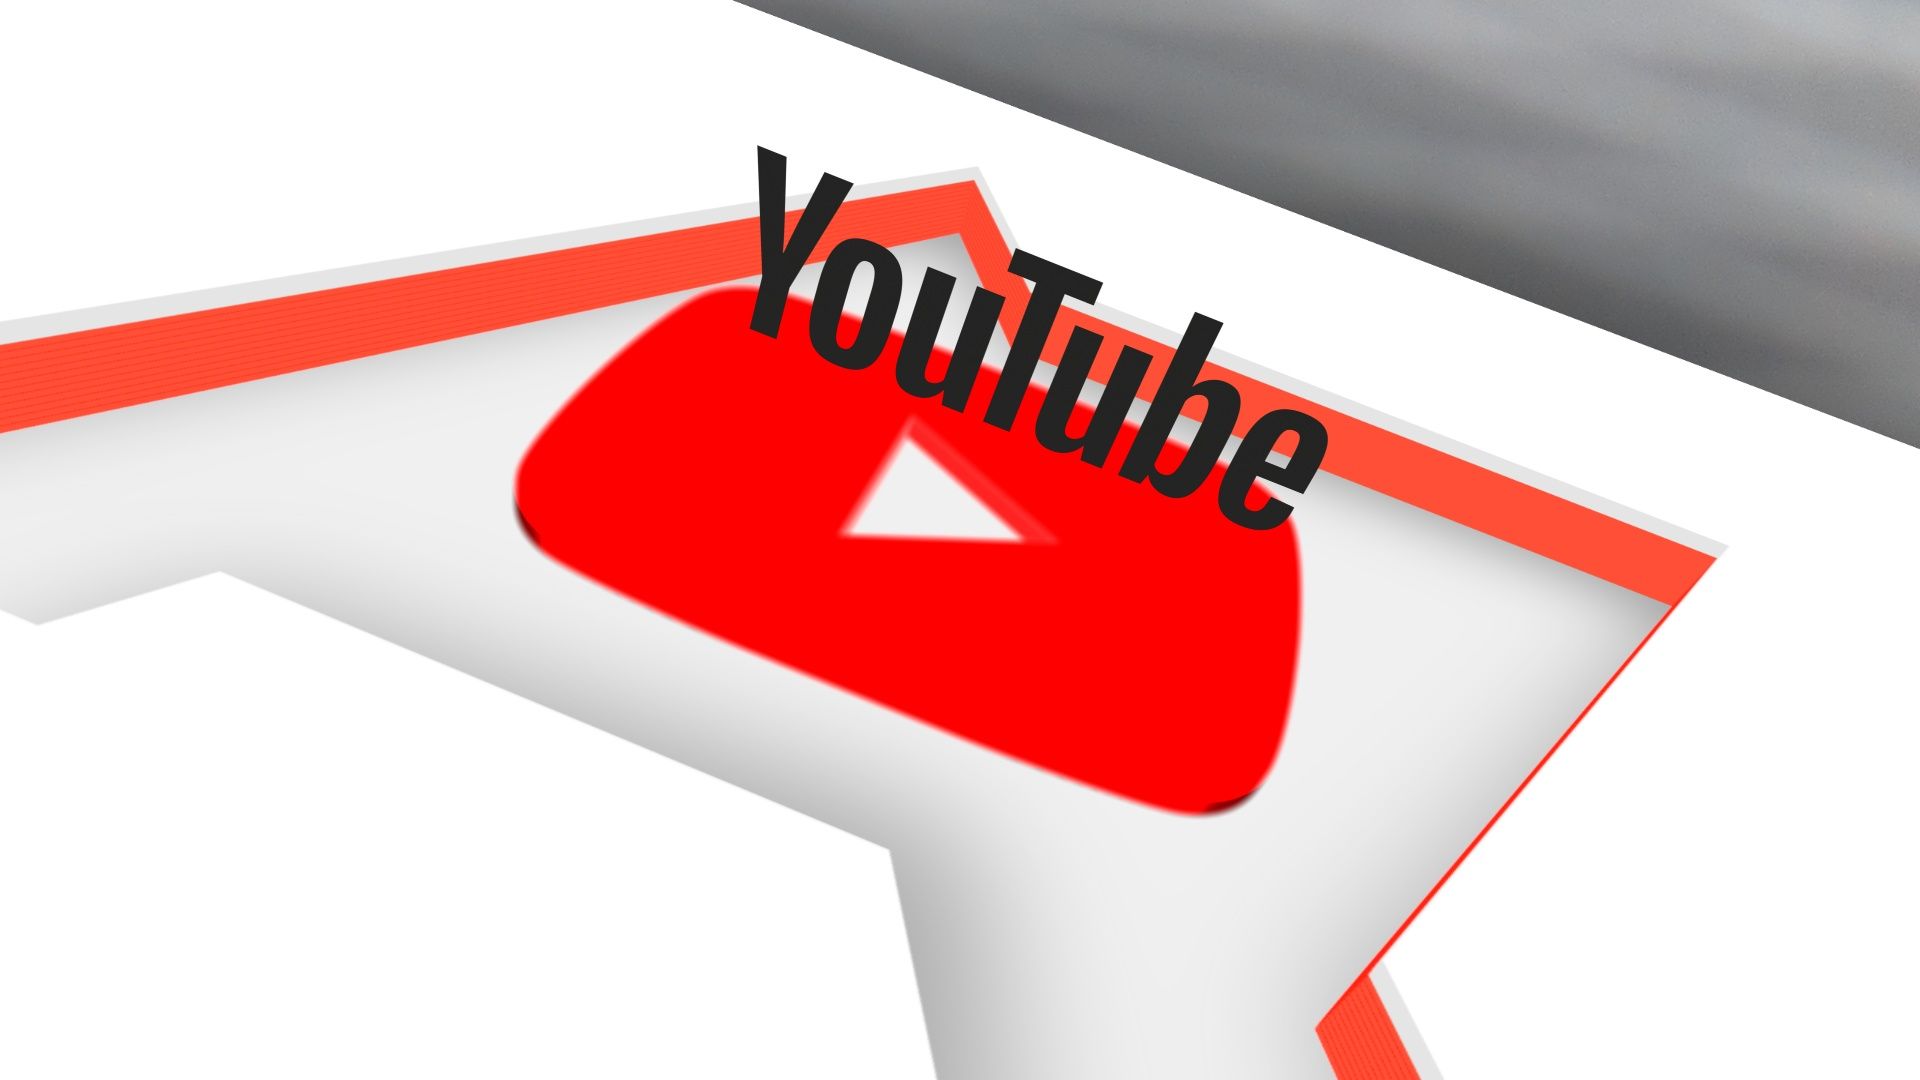 YouTube wants to recommend content based on its primary color